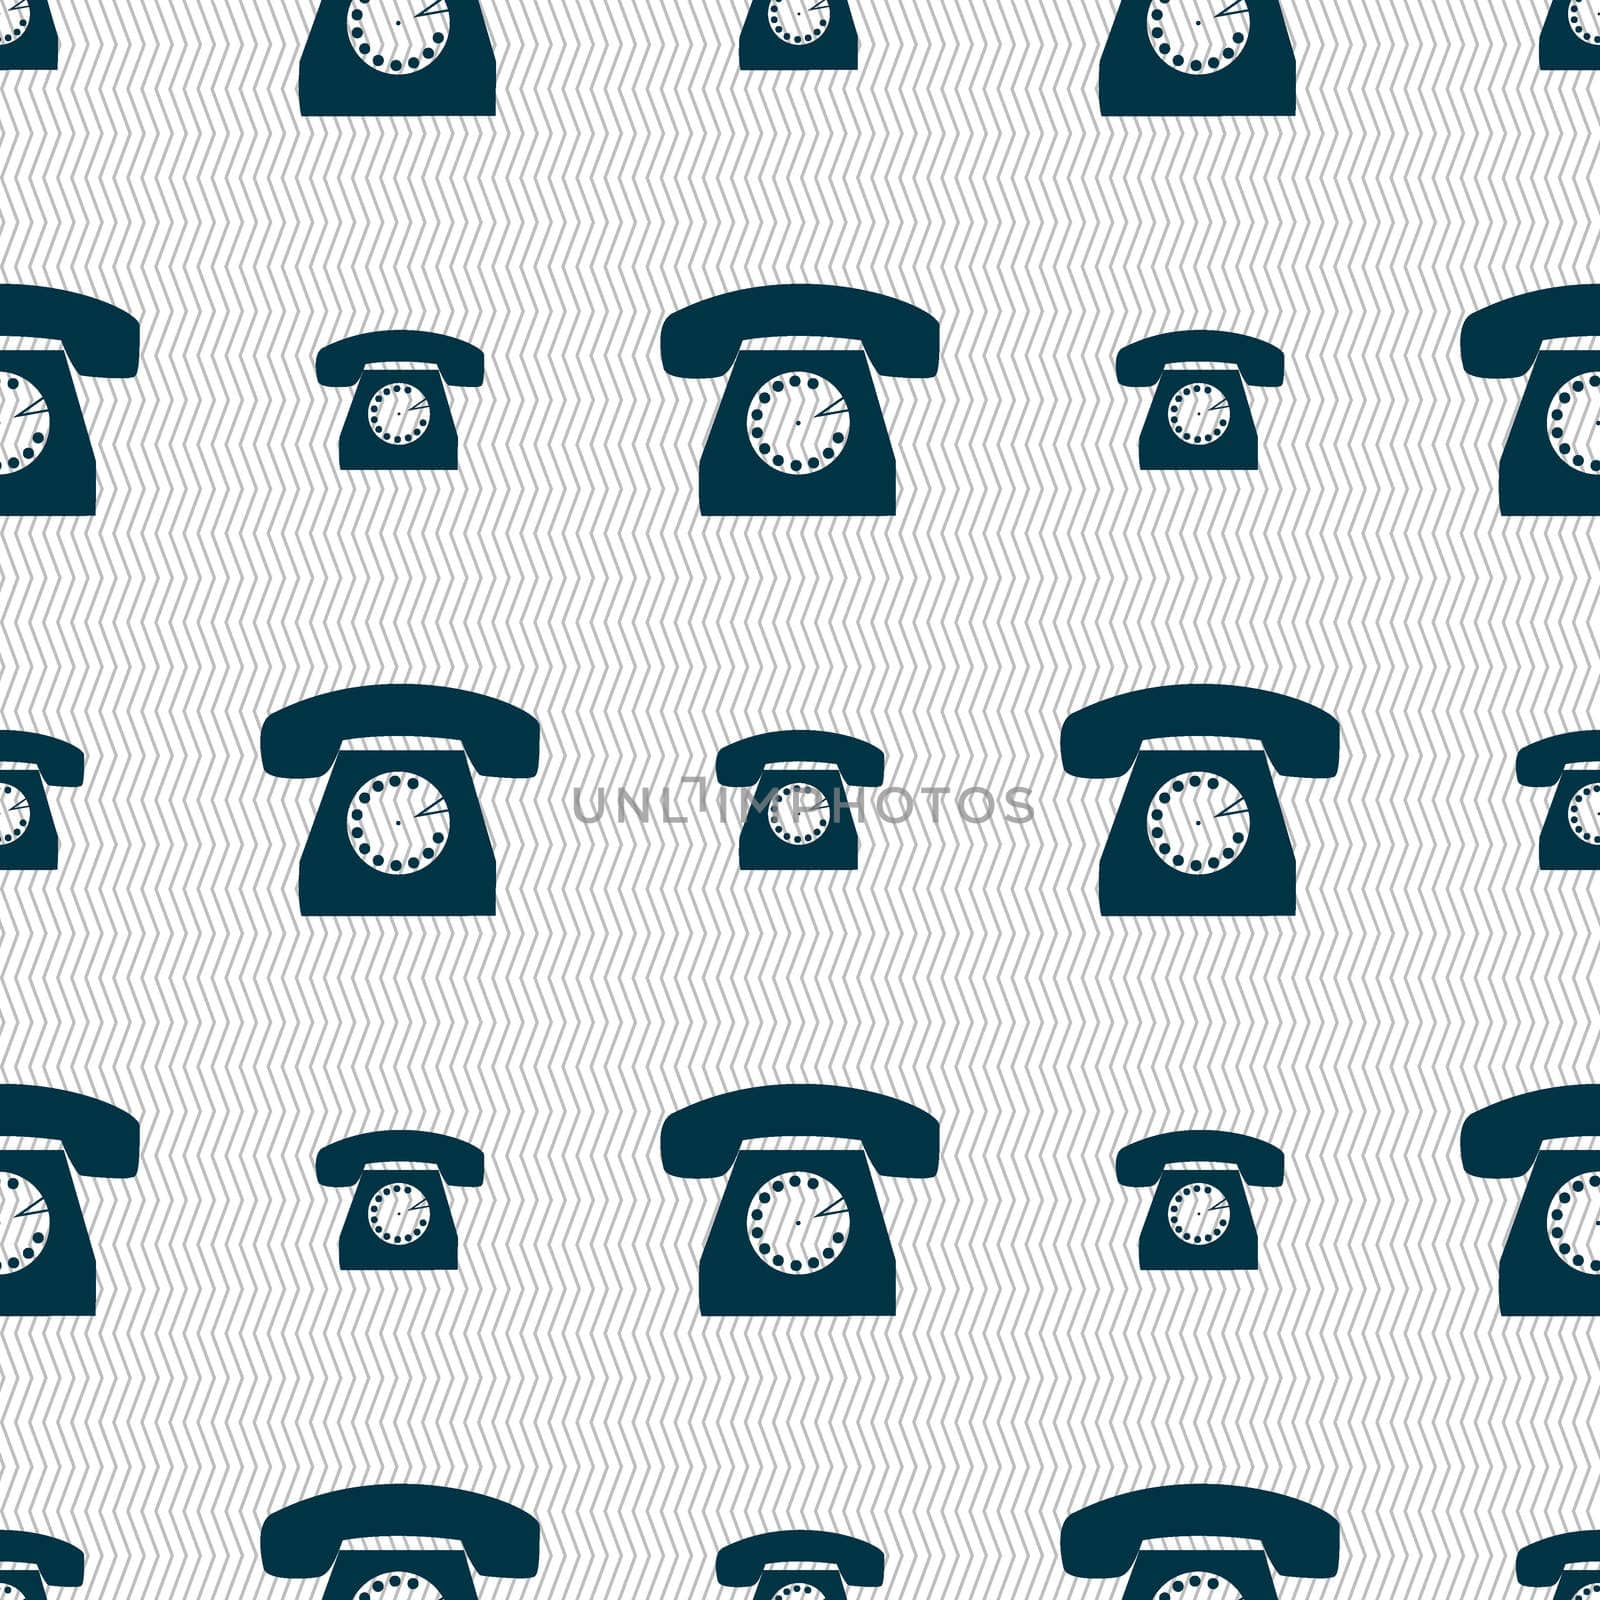 Retro telephone icon symbol. Seamless abstract background with geometric shapes. illustration